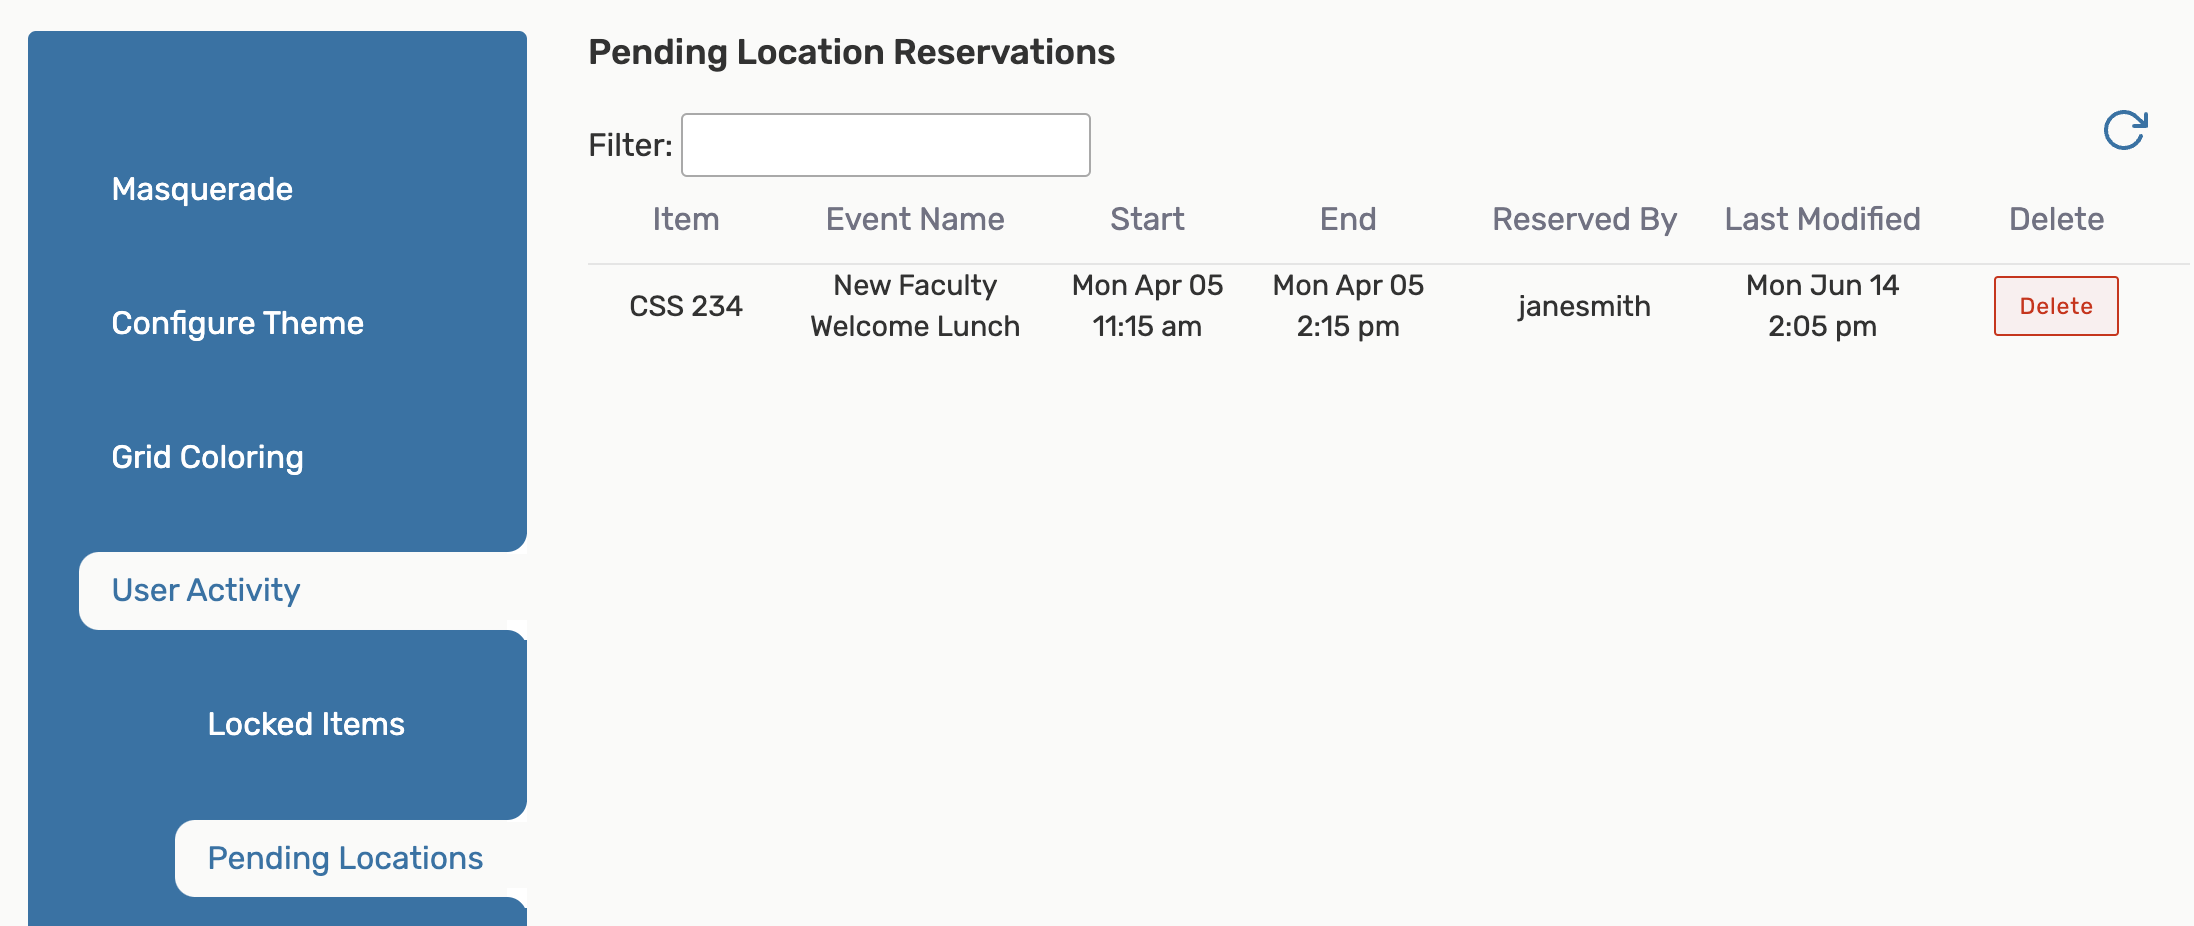 Pending location reservations under User Activity in the System Settings